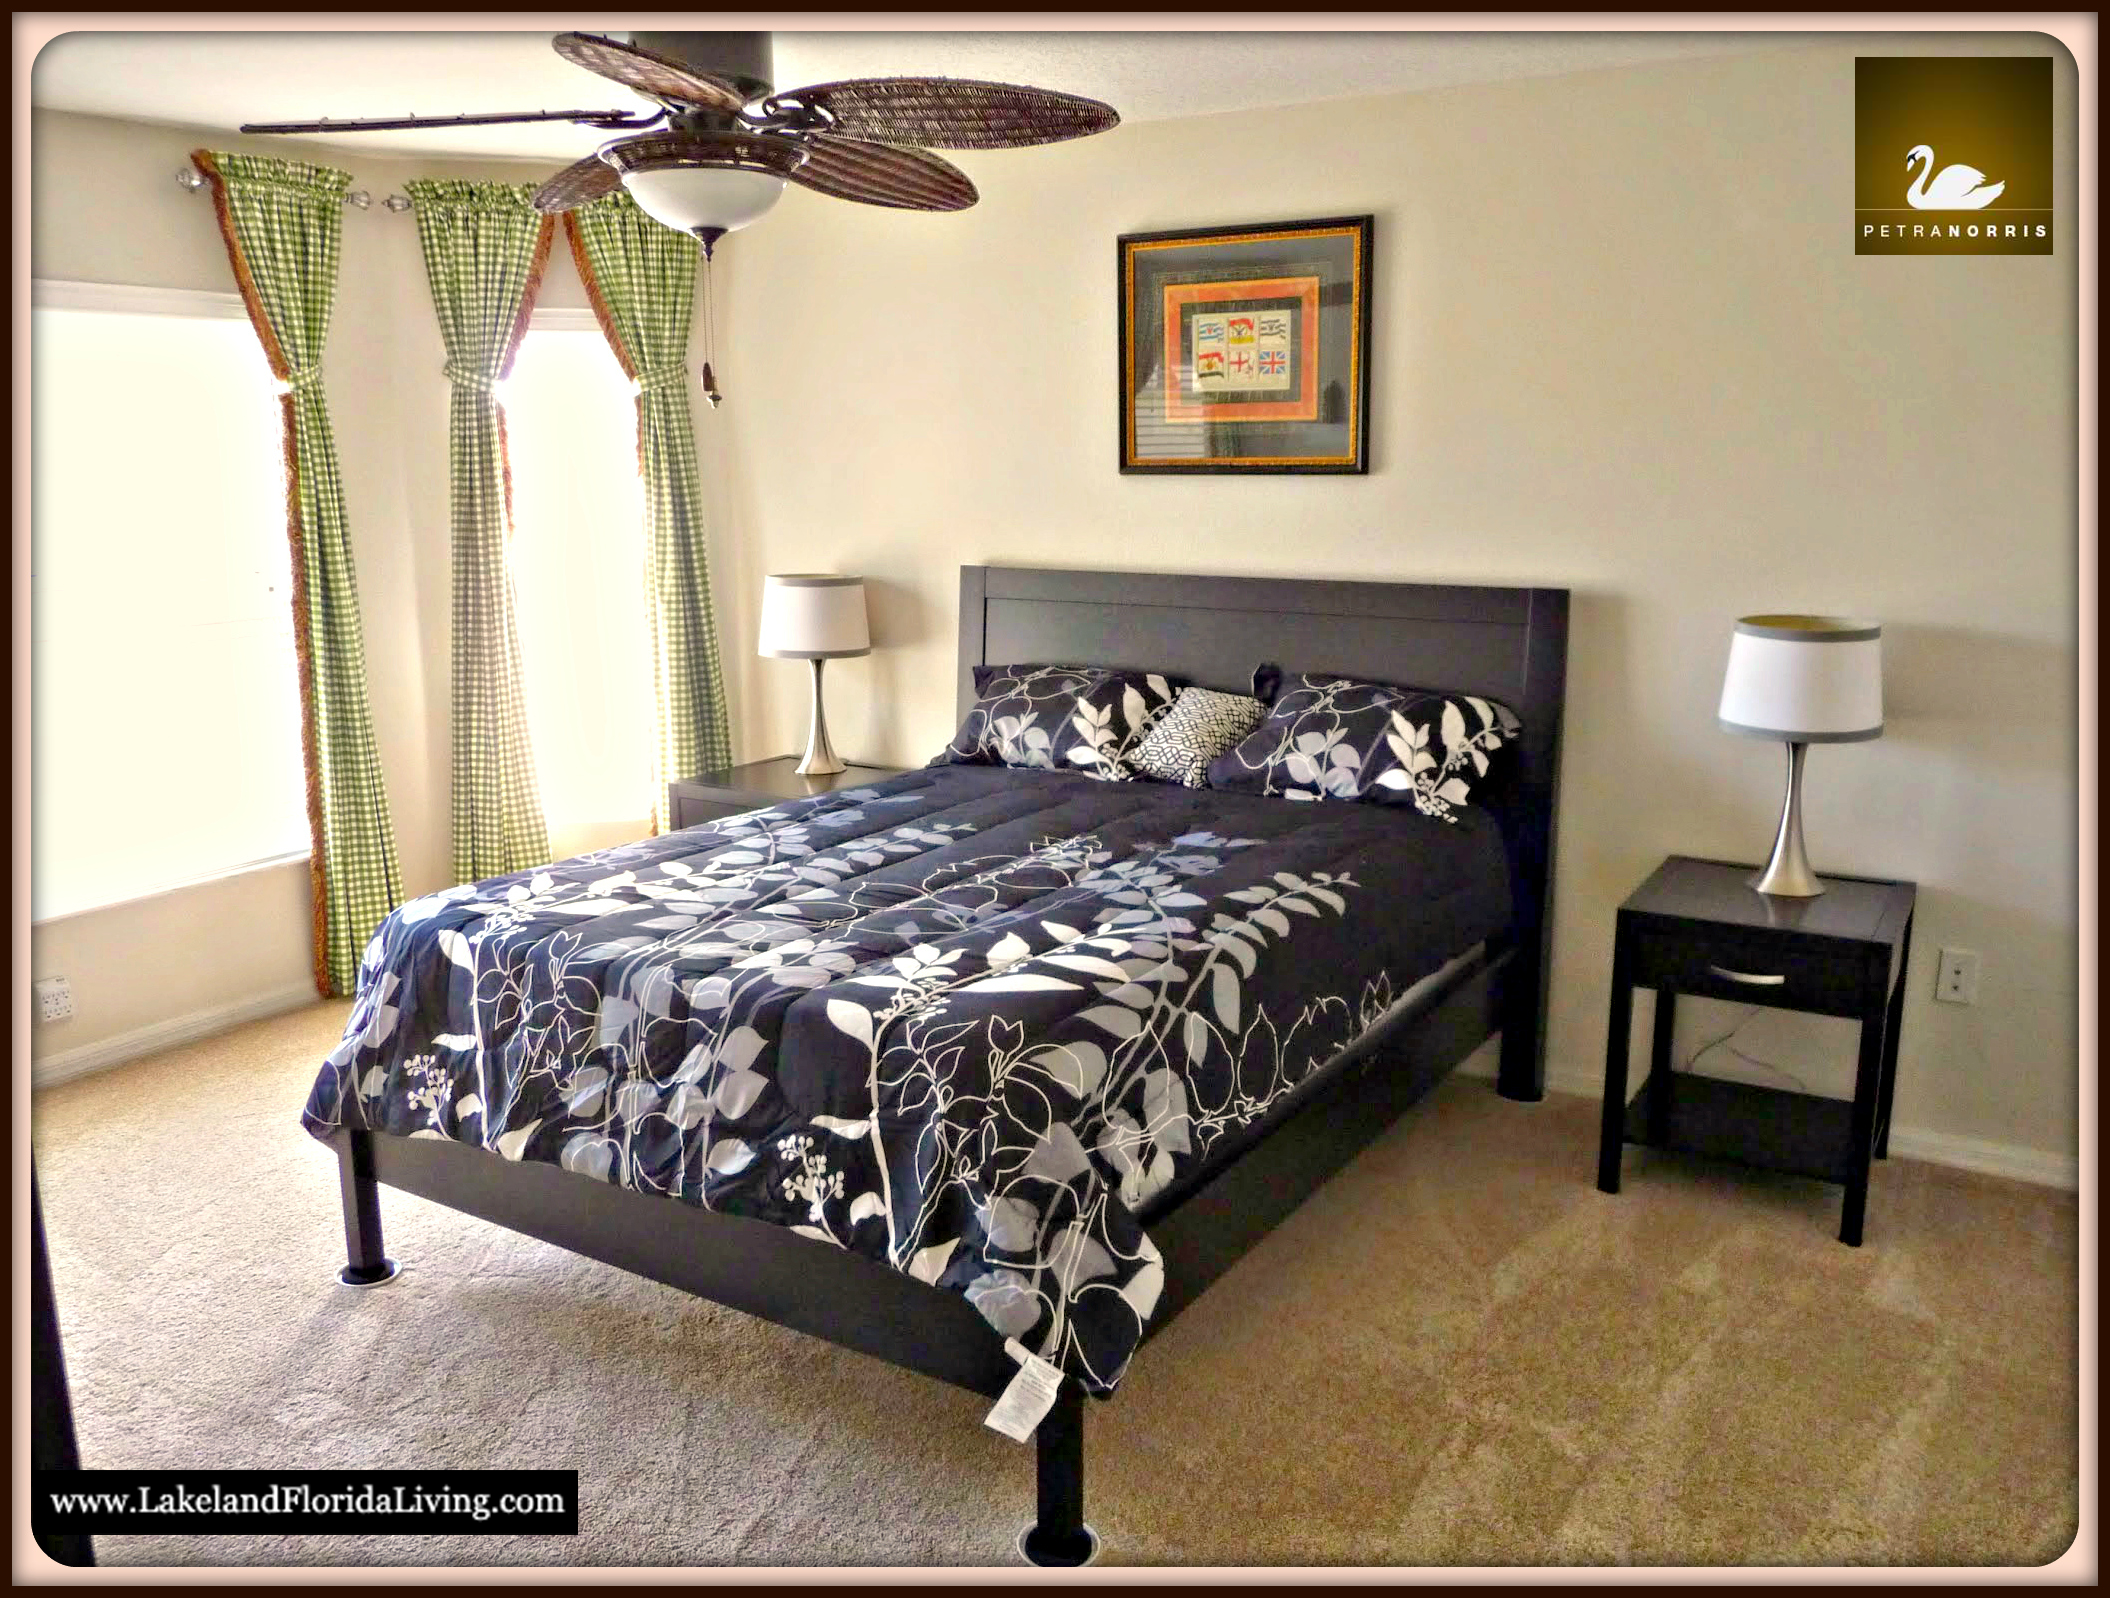 Home for Sale in Solivita Community FL - 213 Grand Canal Dr - 007 Master Bedroom